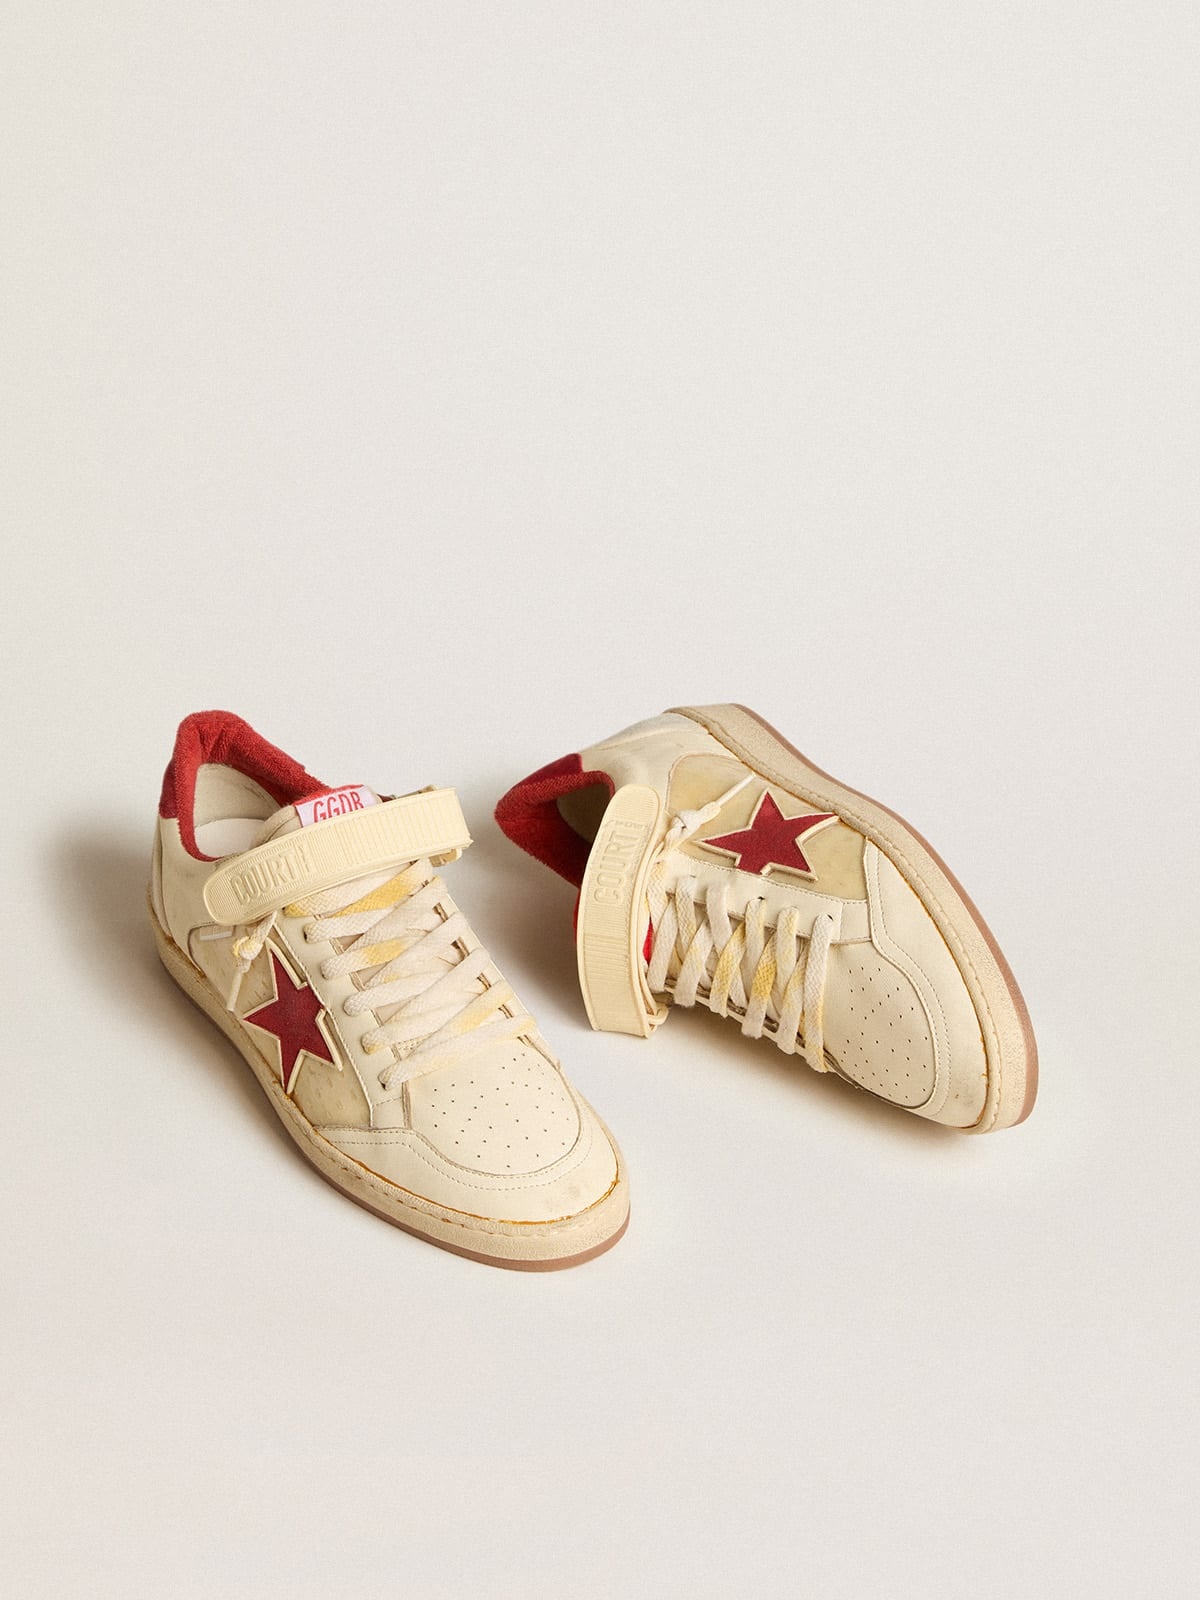 Men’s Ball Star LAB in nappa and PVC with red suede star and heel tab - 2